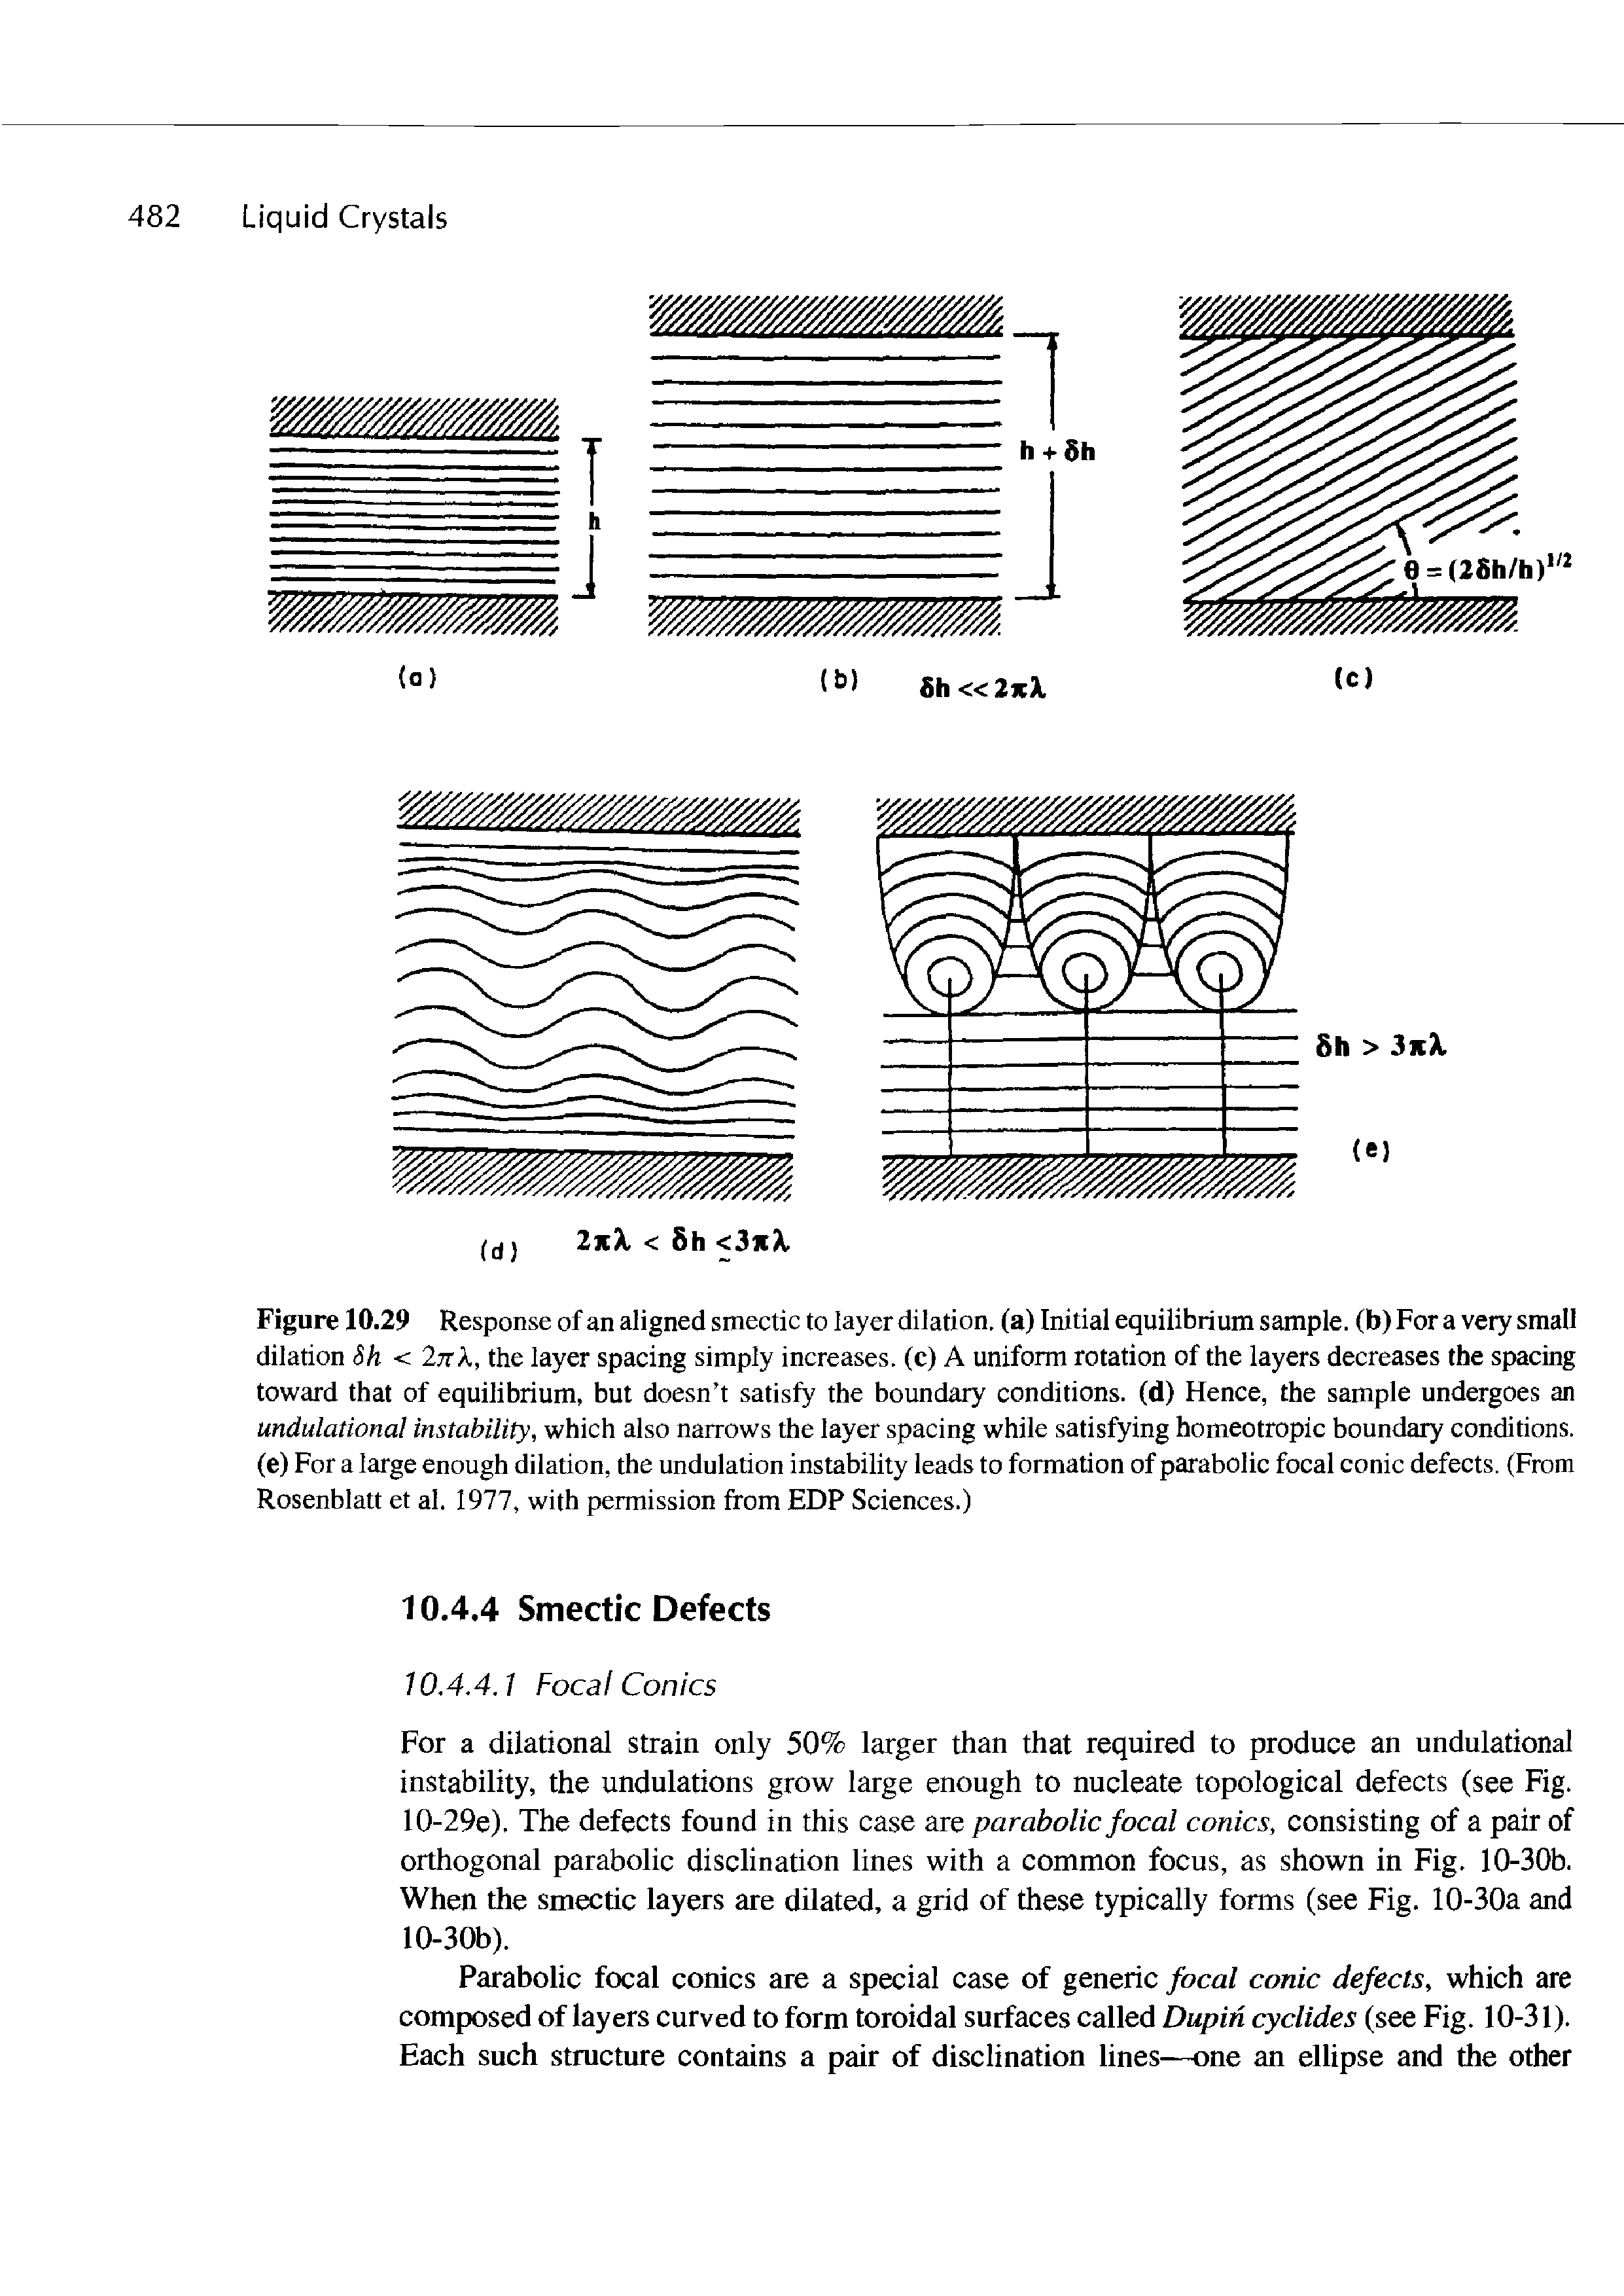 Figure 10.29 Response of an aligned smectic to layer dilation, (a) Initial equilibrium sample, (b) For a very small dilation Sh < Ink, the layer spacing simply increases, (c) A uniform rotation of the layers decreases the spacing toward that of equilibrium, but doesn t satisfy the boundary conditions, (d) Hence, the sample undergoes an mdulational instability, which also narrows the layer spacing while satisfying homeotropic boundary conditions, (e) For a large enough dilation, the undulation instability leads to formation of parabolic focal conic defects. (From Rosenblatt et al. 1977, with permission from EDP Sciences.)...